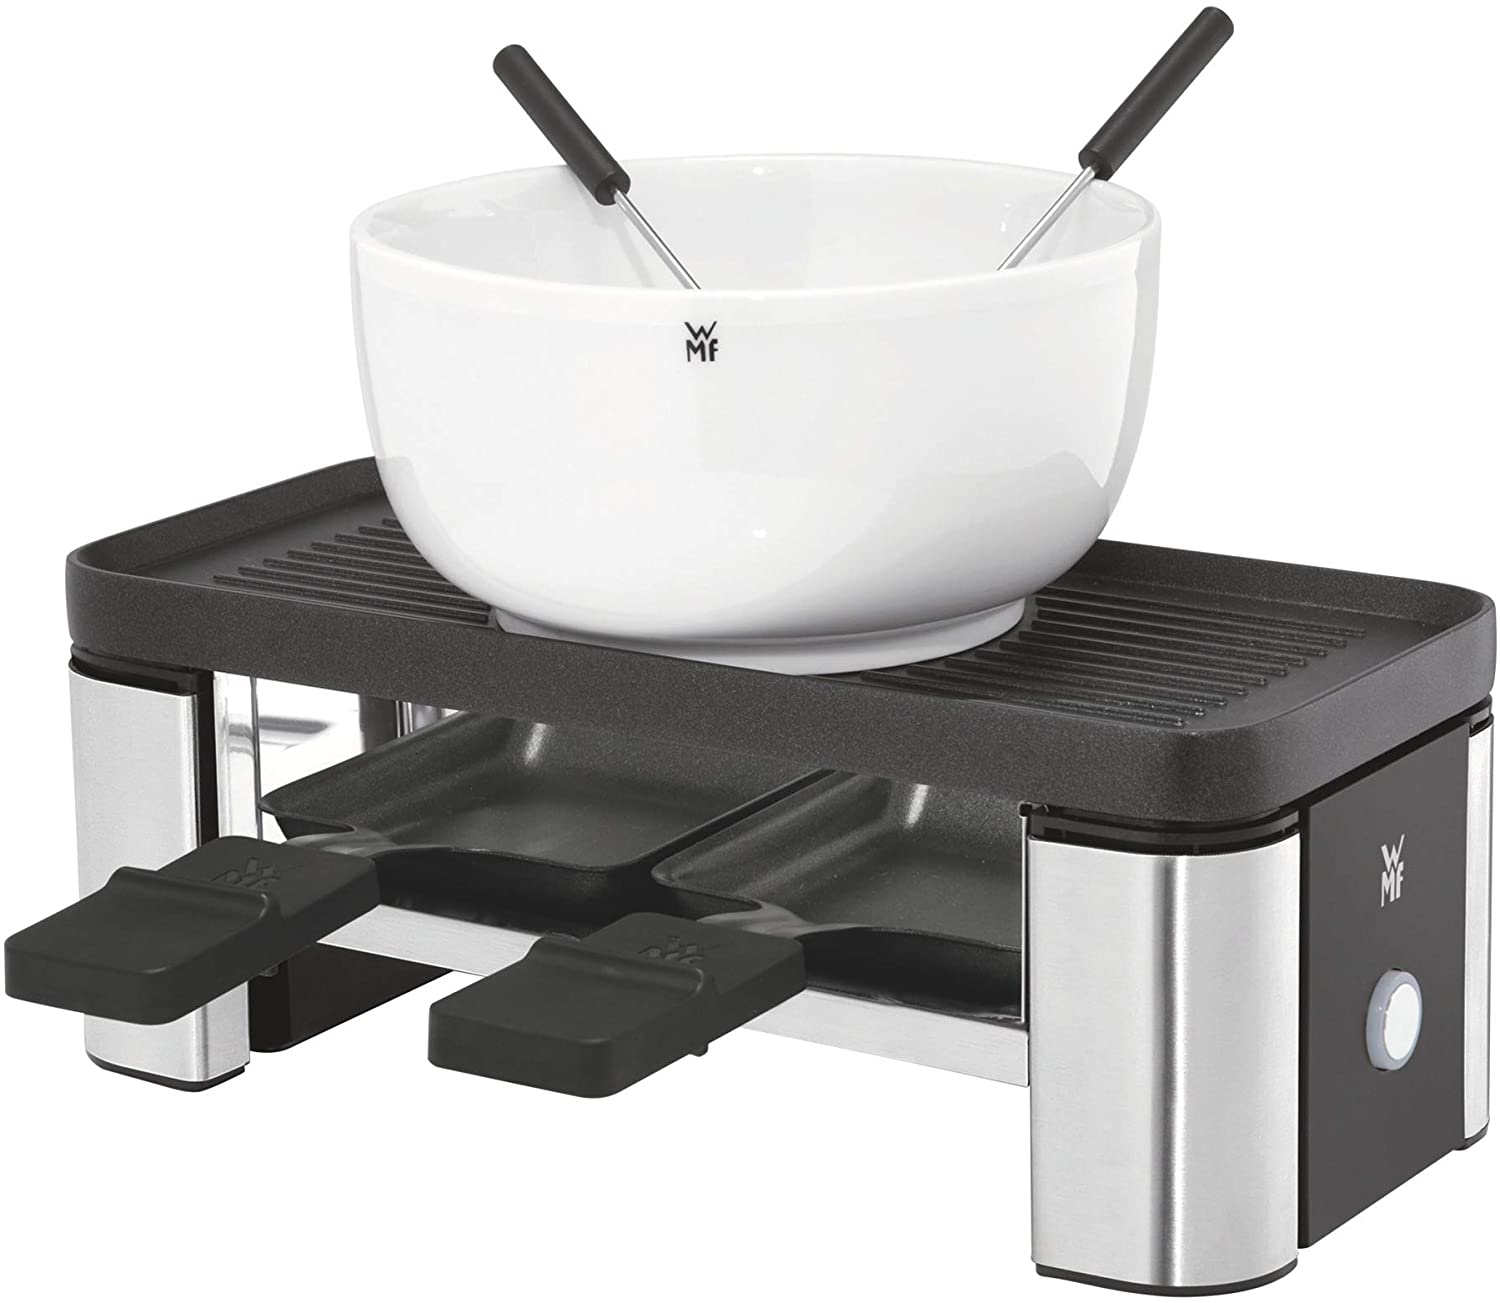 WMF Küchenminis Raclette 2 Person, Grill, 3 Pans, Spatulas and Ceramic Bowl for Chocolate Fondue, 370 W, Matte Stainless Steel